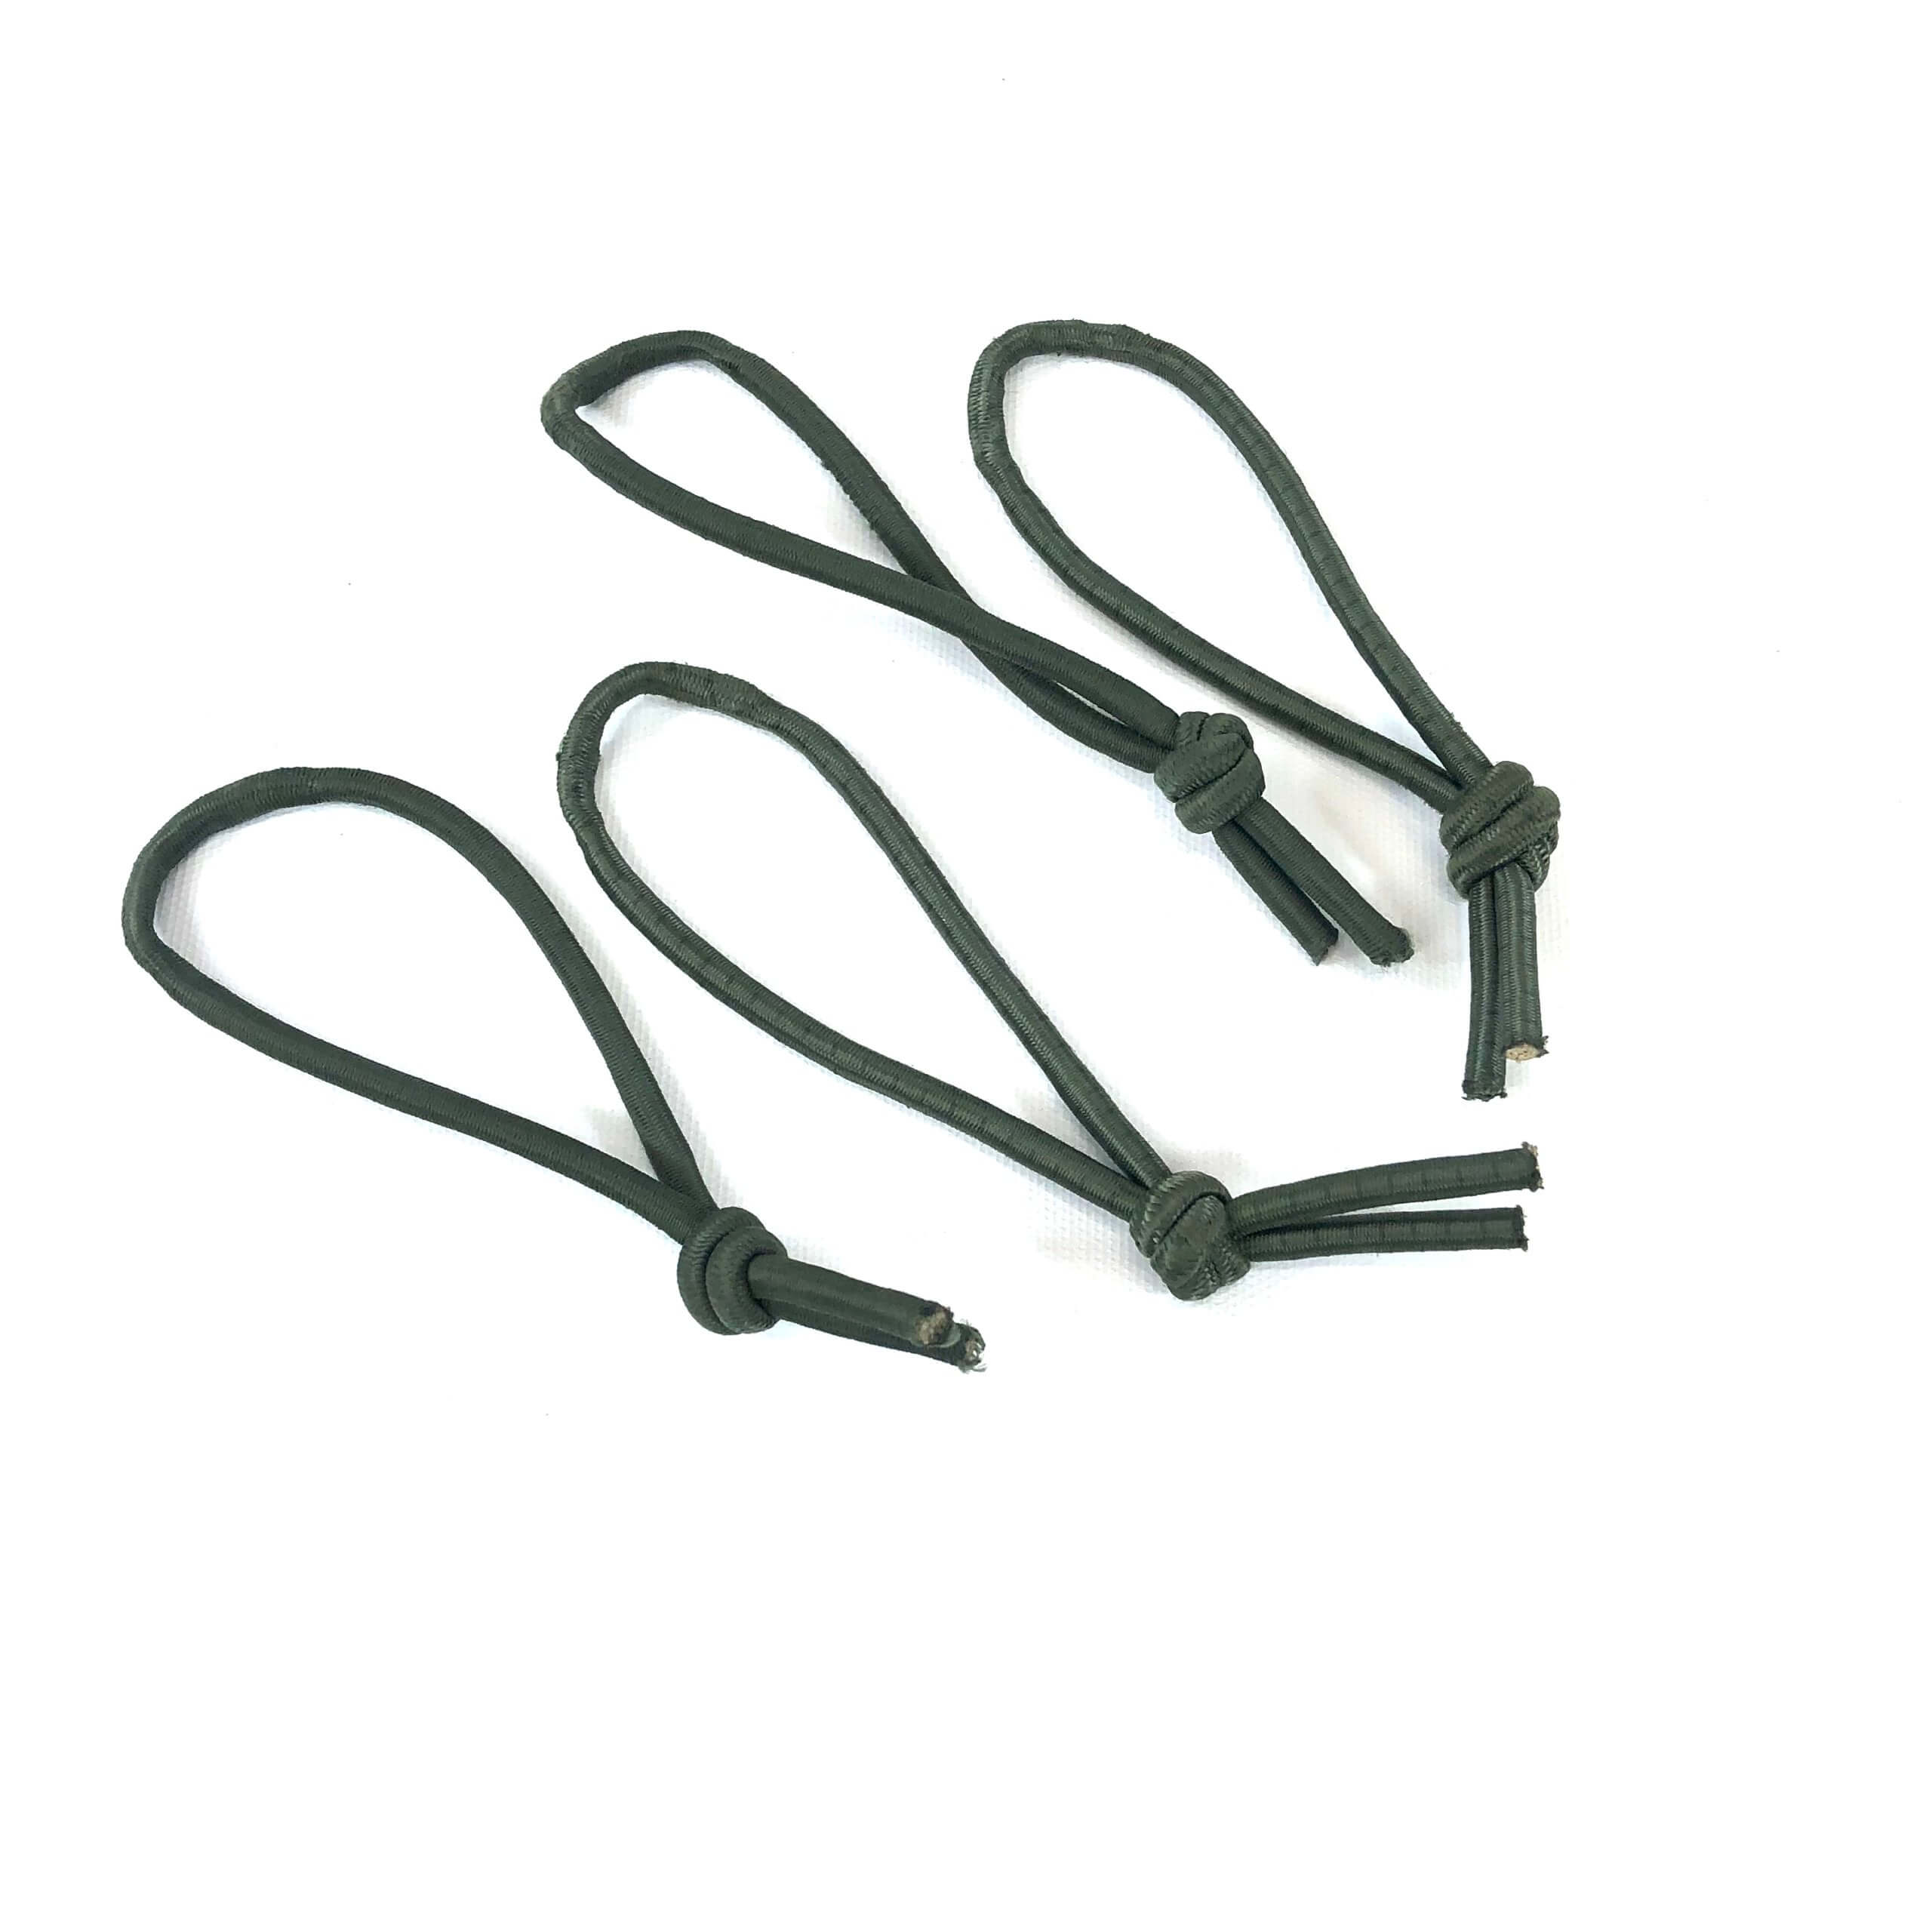 6mm x 40cm LONG NATO GREEN BUNGEE CORDS MILITARY ARMY BASHA STRAPS PACK OF 10 